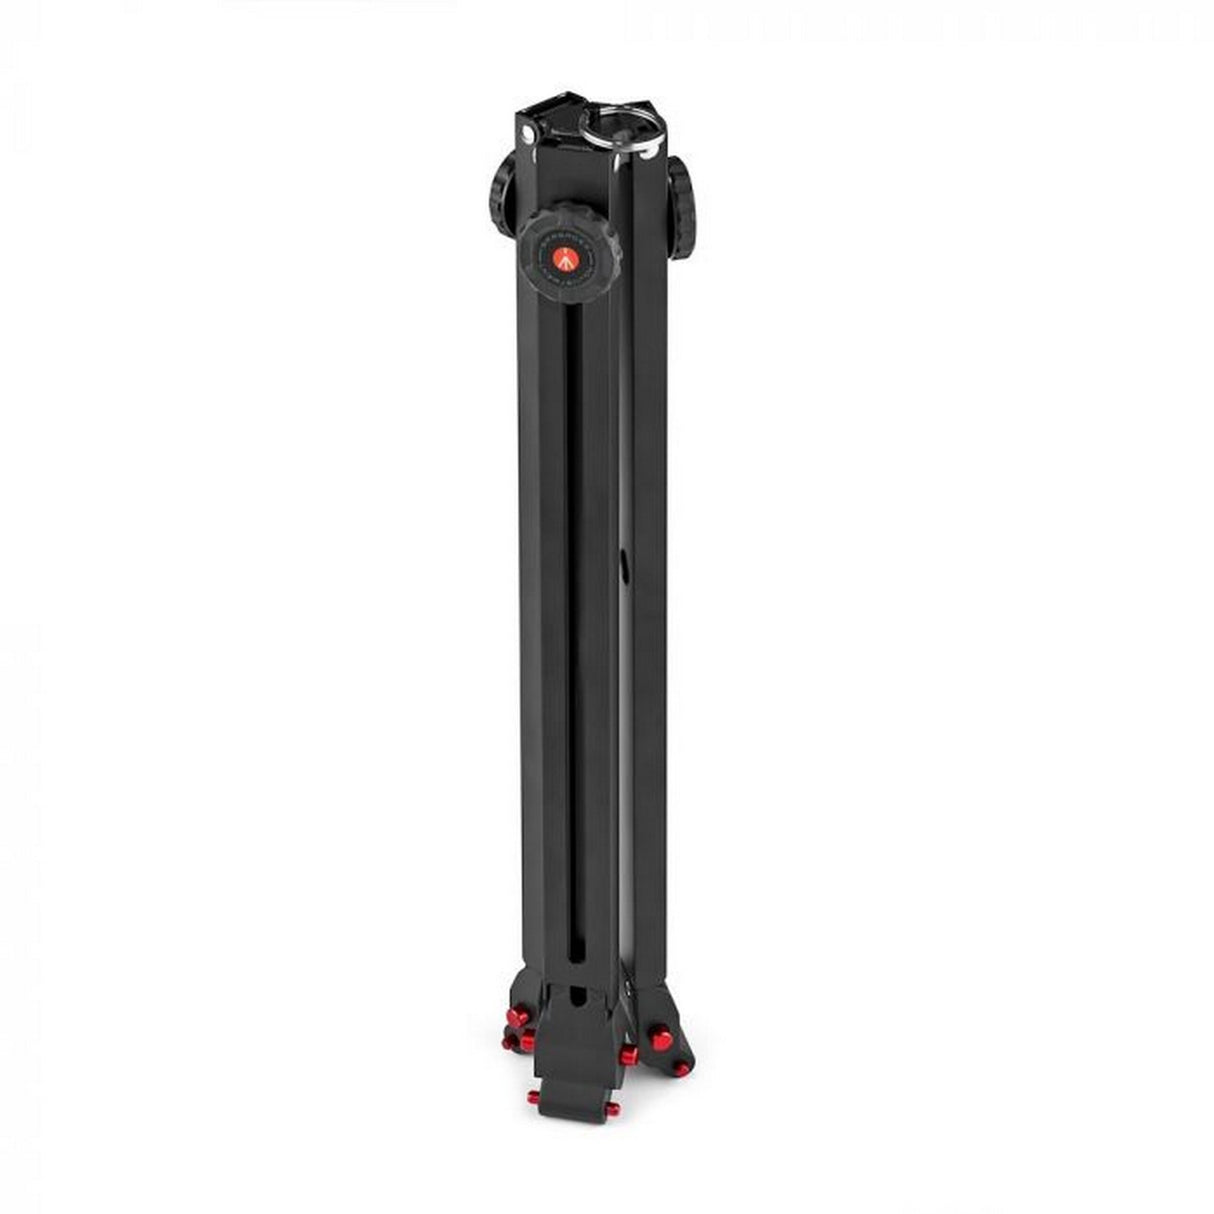 Manfrotto MVK526TWINFCUS 526 Video Head with 645 Fast Twin Carbon Tripod